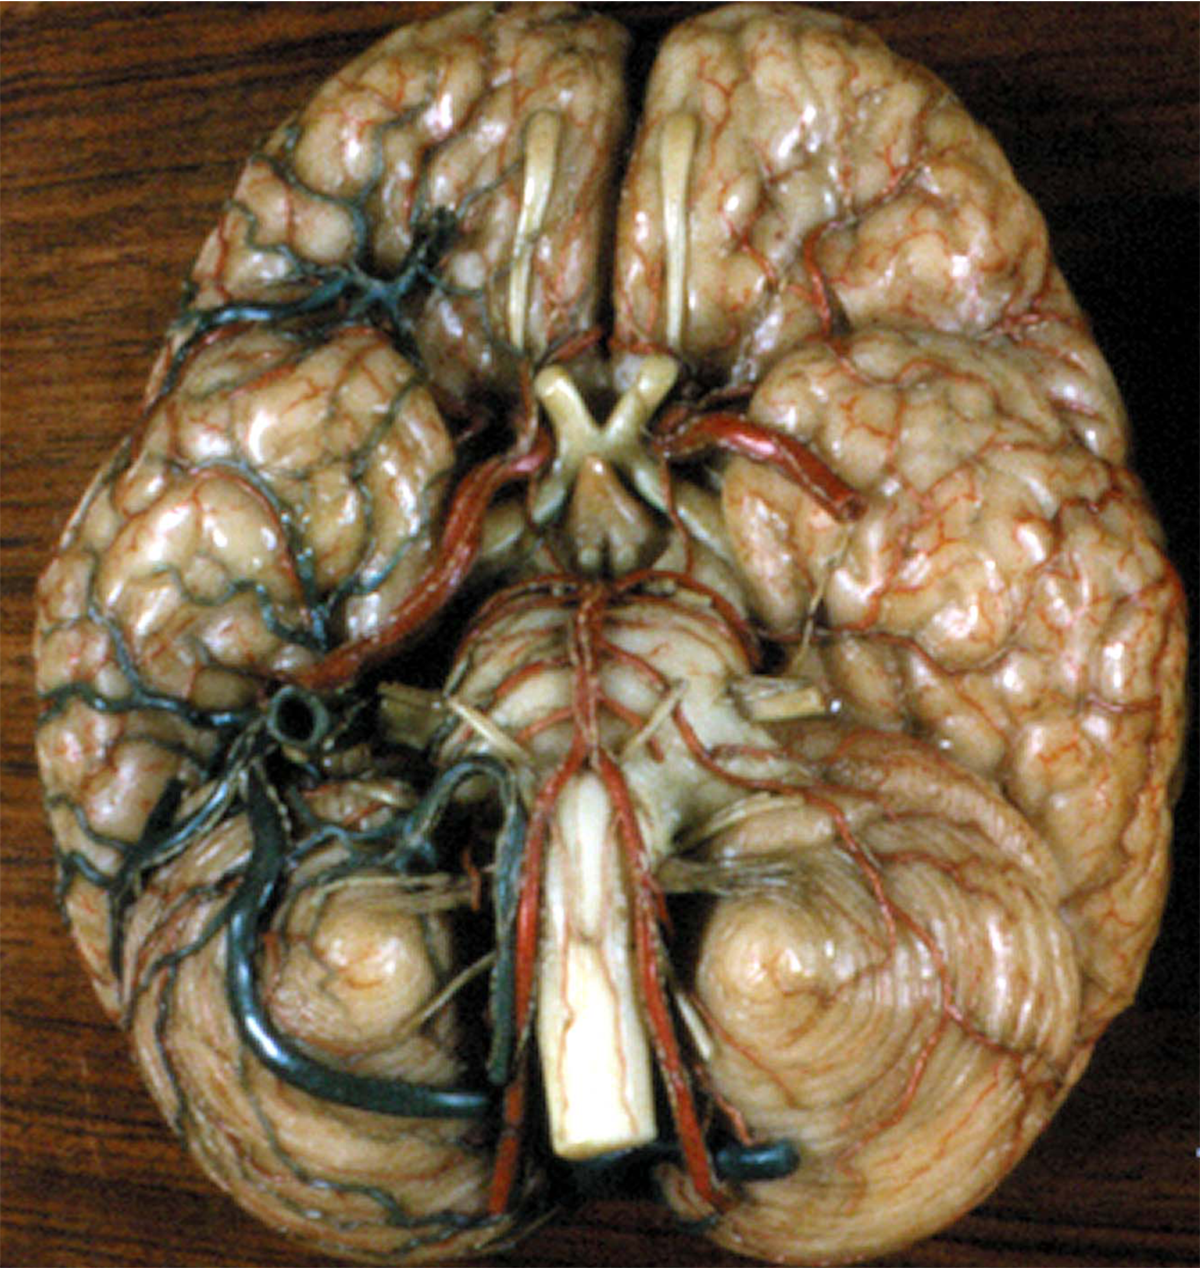 Fig. 14. Basal view of the brain showing the external surface of the floor of the hypothalamus and its arterial vessels. The infundibulum (I) lies posteriorly to the optic tracts and chiasm (ot) and anterior to the mammillary bodies (m). The arterial circle of Willis surrounds the hypothalamic floor and provides the arterial supply to the hypothalamic nuclei and fiber tracts. ac = anterior cerebral artery, aco = anterior communicating artery, b = basilar artery, ic = internal carotid artery, P = pons, pc = posterior cerebral artery, pco = posterior communicating artery. (From the XIX century wax collection of human brains at the Museum of the Department of Human Anatomy of the University of Bologna, Italy.)